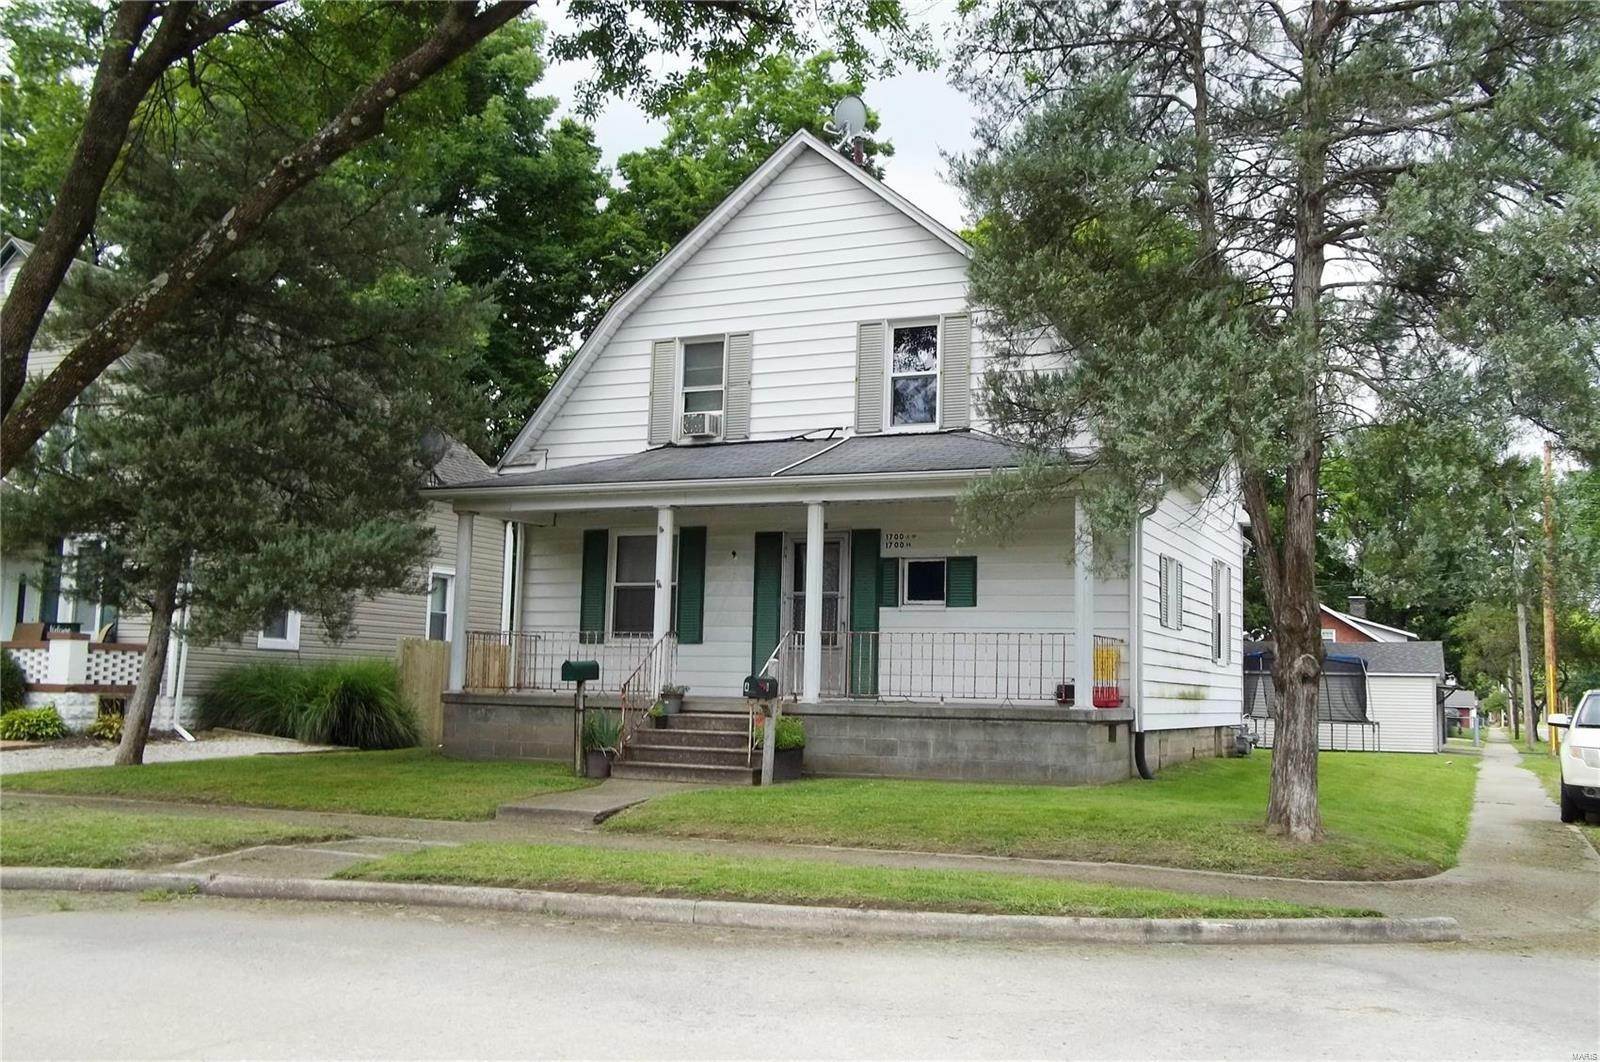 Property for Sale at 1700 Cypress Street Highland, Illinois 62249 United States